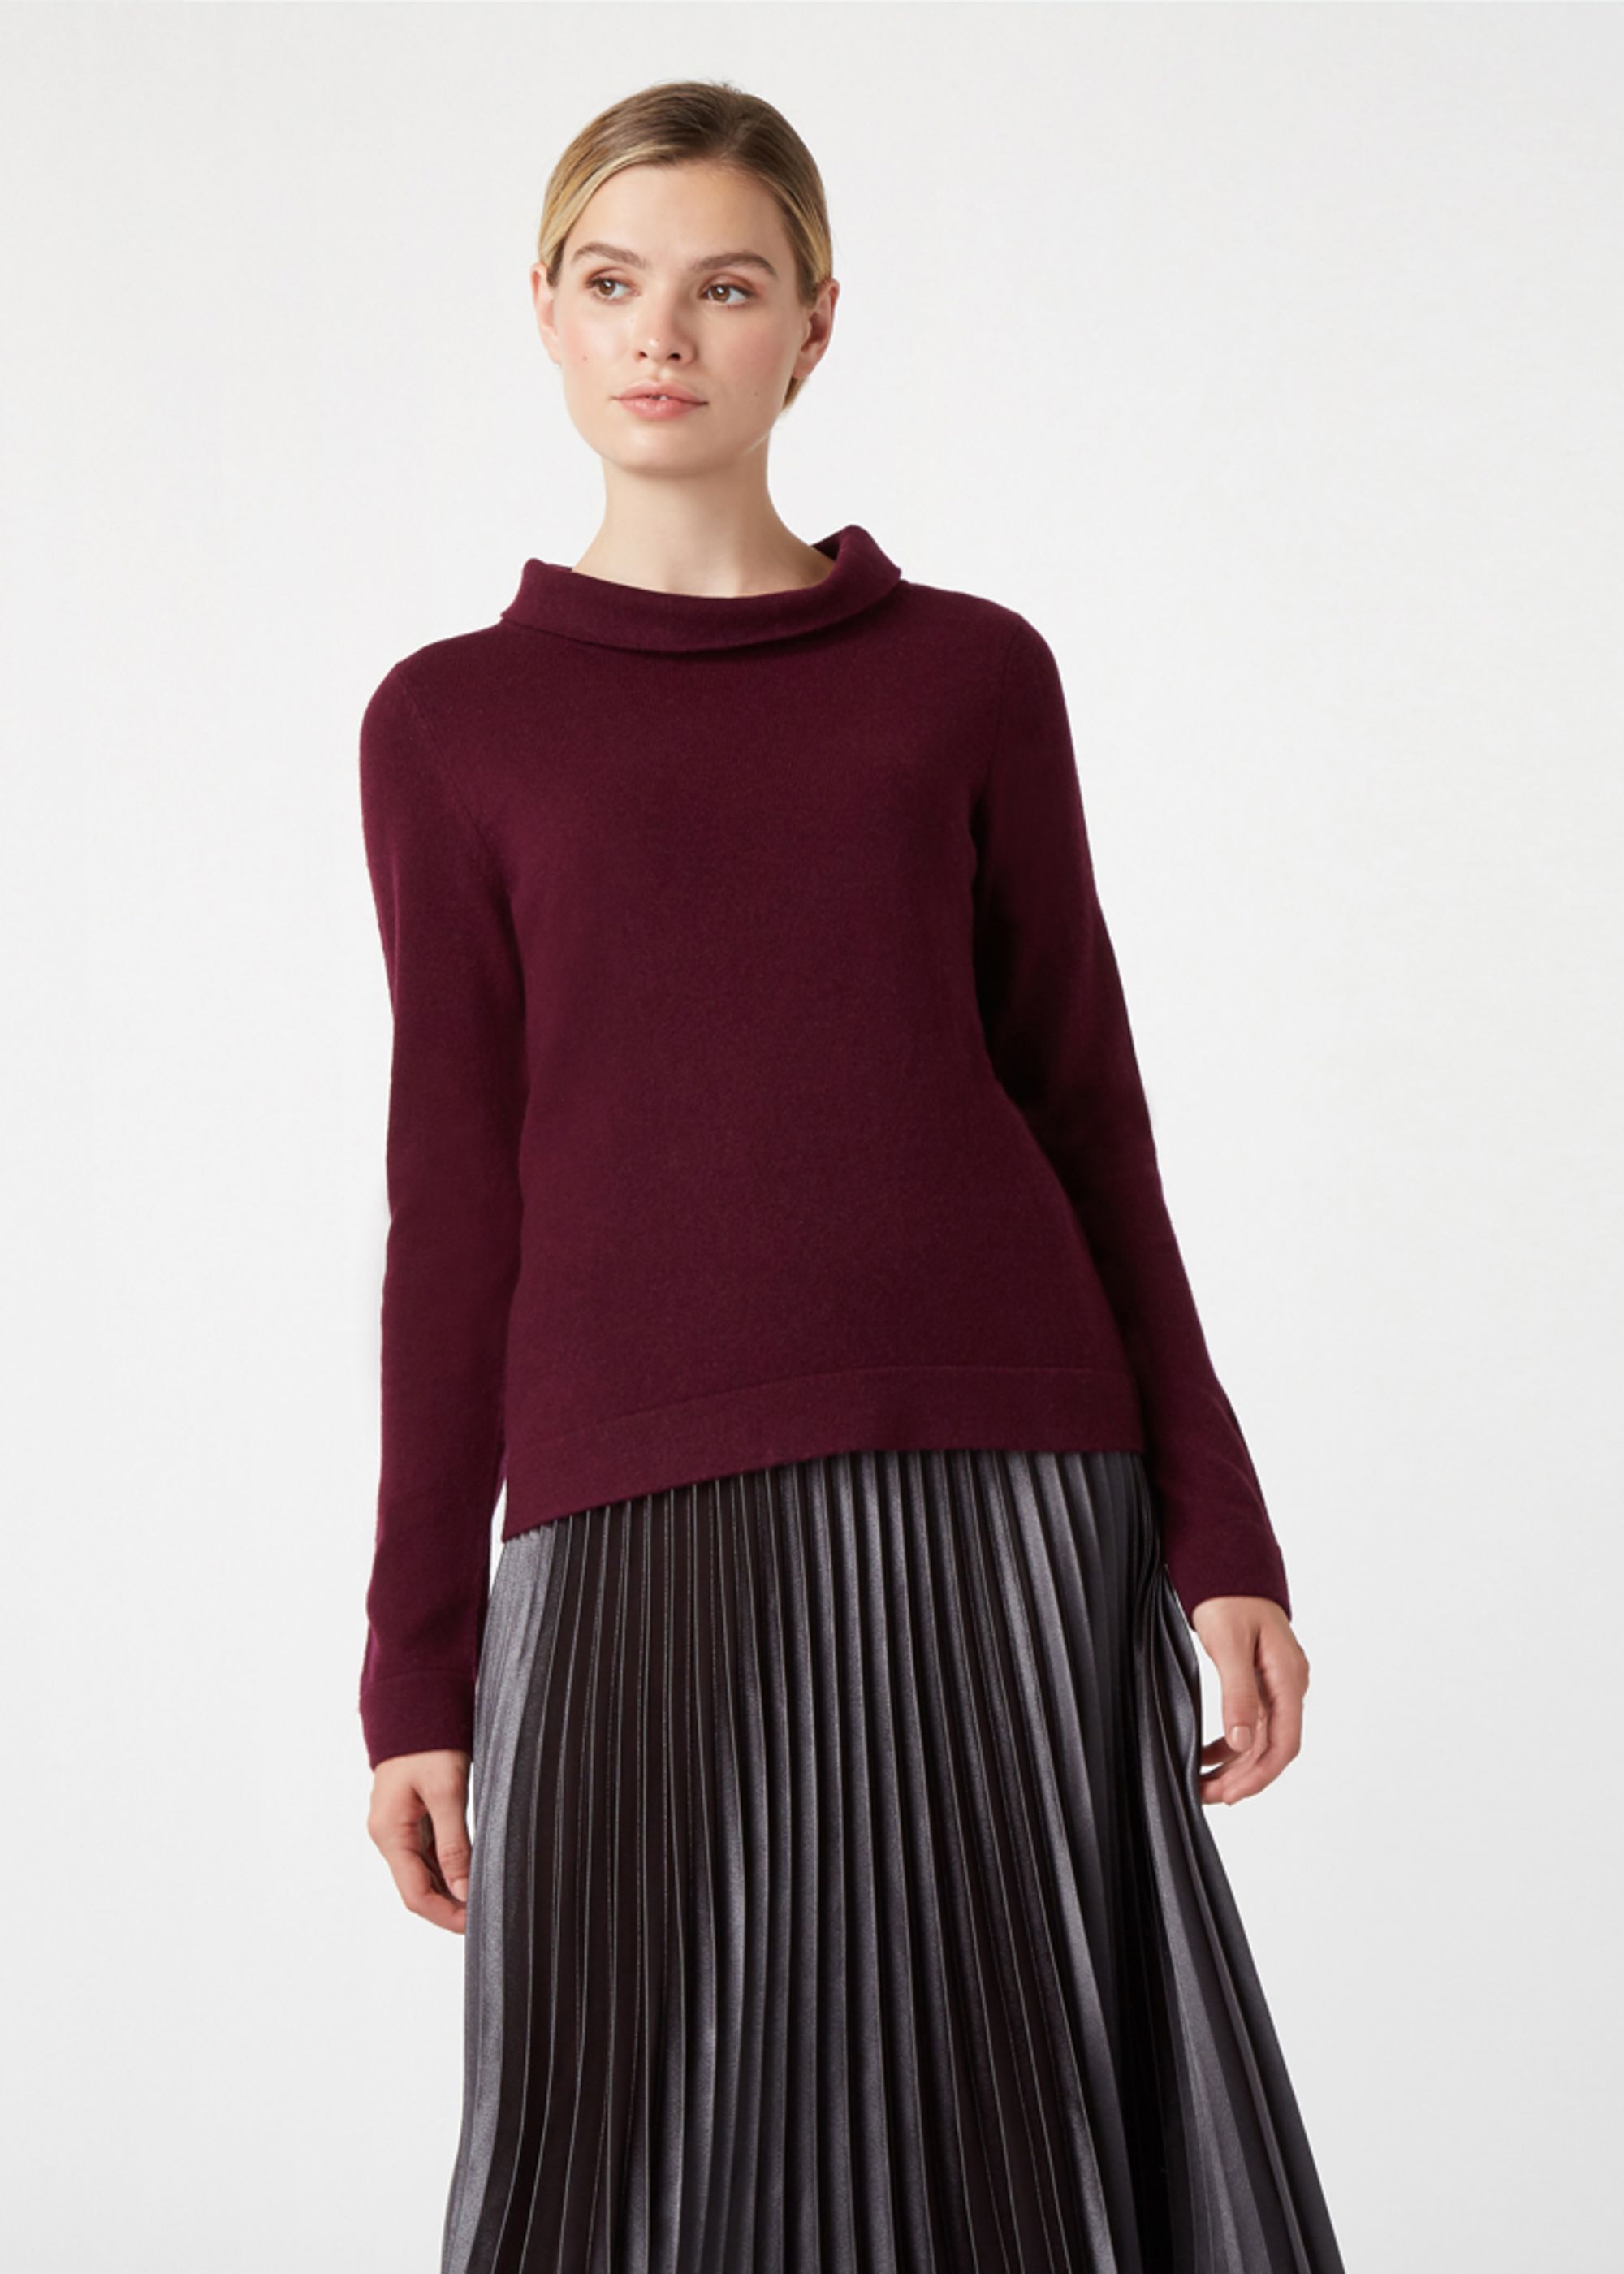 Hobbs Audrey Wool Cashmere Sweater Pullover Long Sleeve | eBay